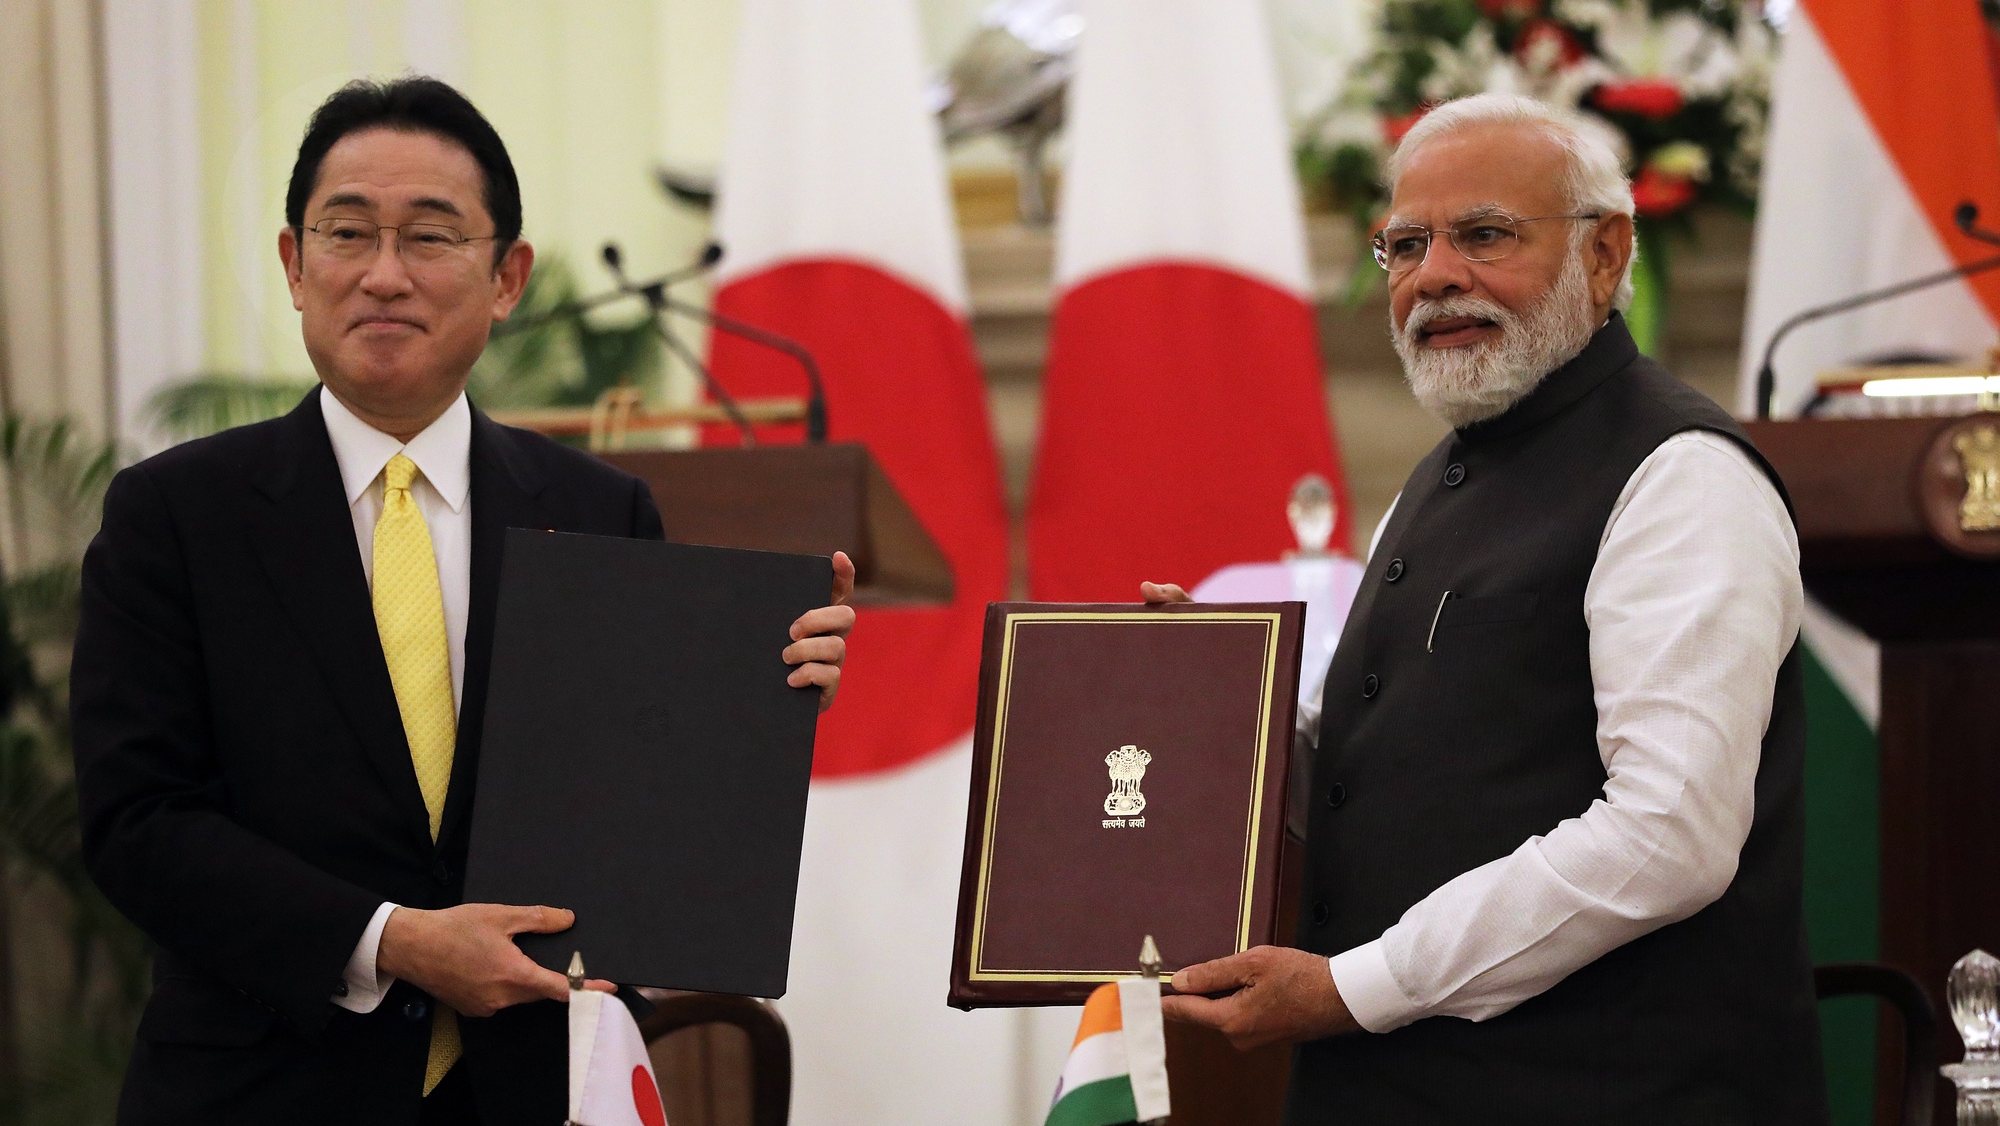 epa09836215 Indian Prime Minister Narendra Modi (R ) and Japanese Prime Minister Fumio Kishida exchange documents after signing the joint statement  in New Delhi, India, 19 March 2022. Prime Minister Fumio Kishida is on a two-day visit to India where he will attend the 14th India-Japan summit. Kishido announced 42 billion US dollar investment target in India over the next five years. India and Japan signed the series of agreements including the cyber security.  EPA/HARISH TYAGI